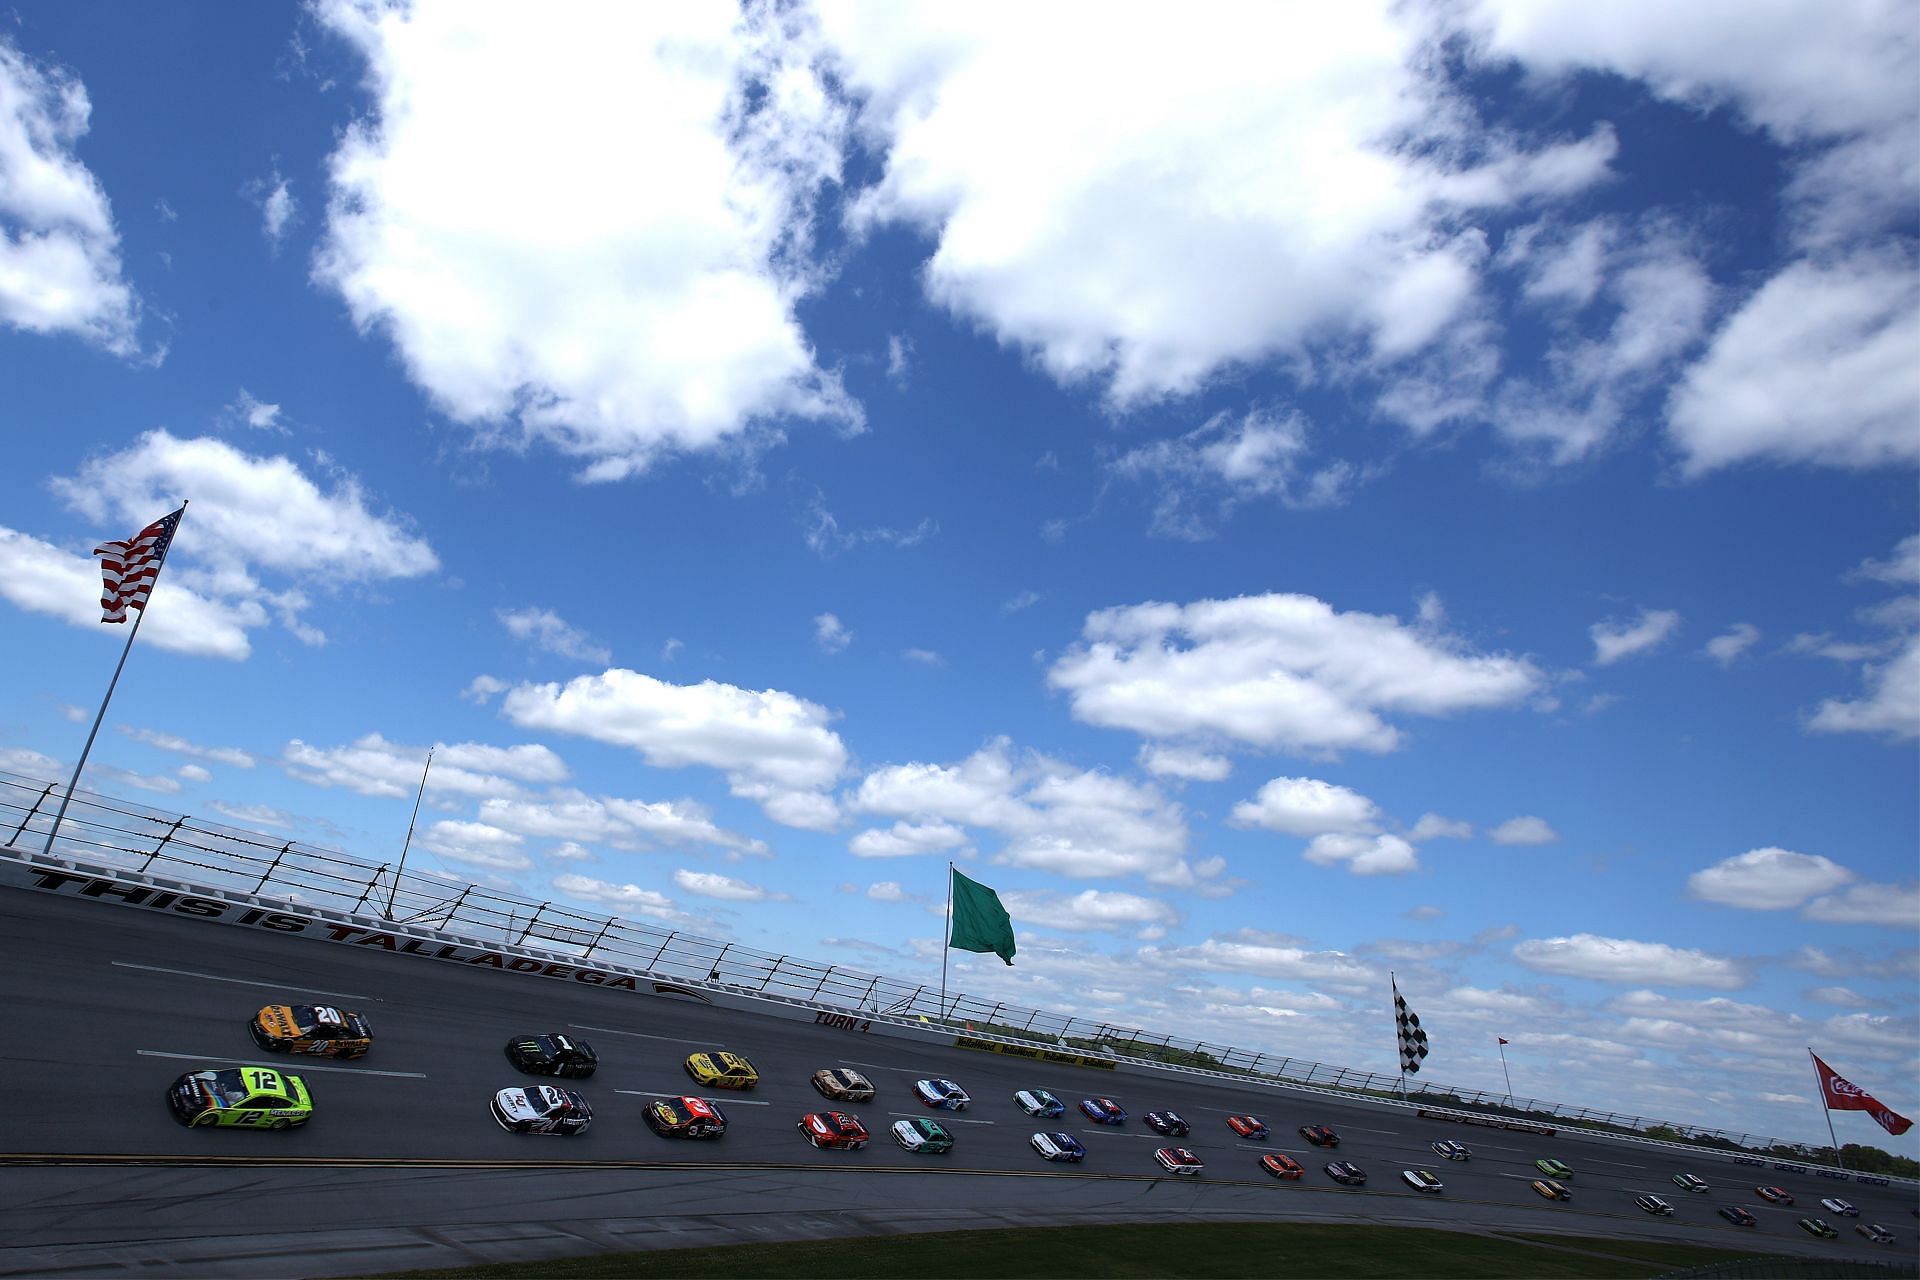 NASCAR 2022 at Talladega: Race schedule and timings for GEICO 500 at Talladega Superspeedway